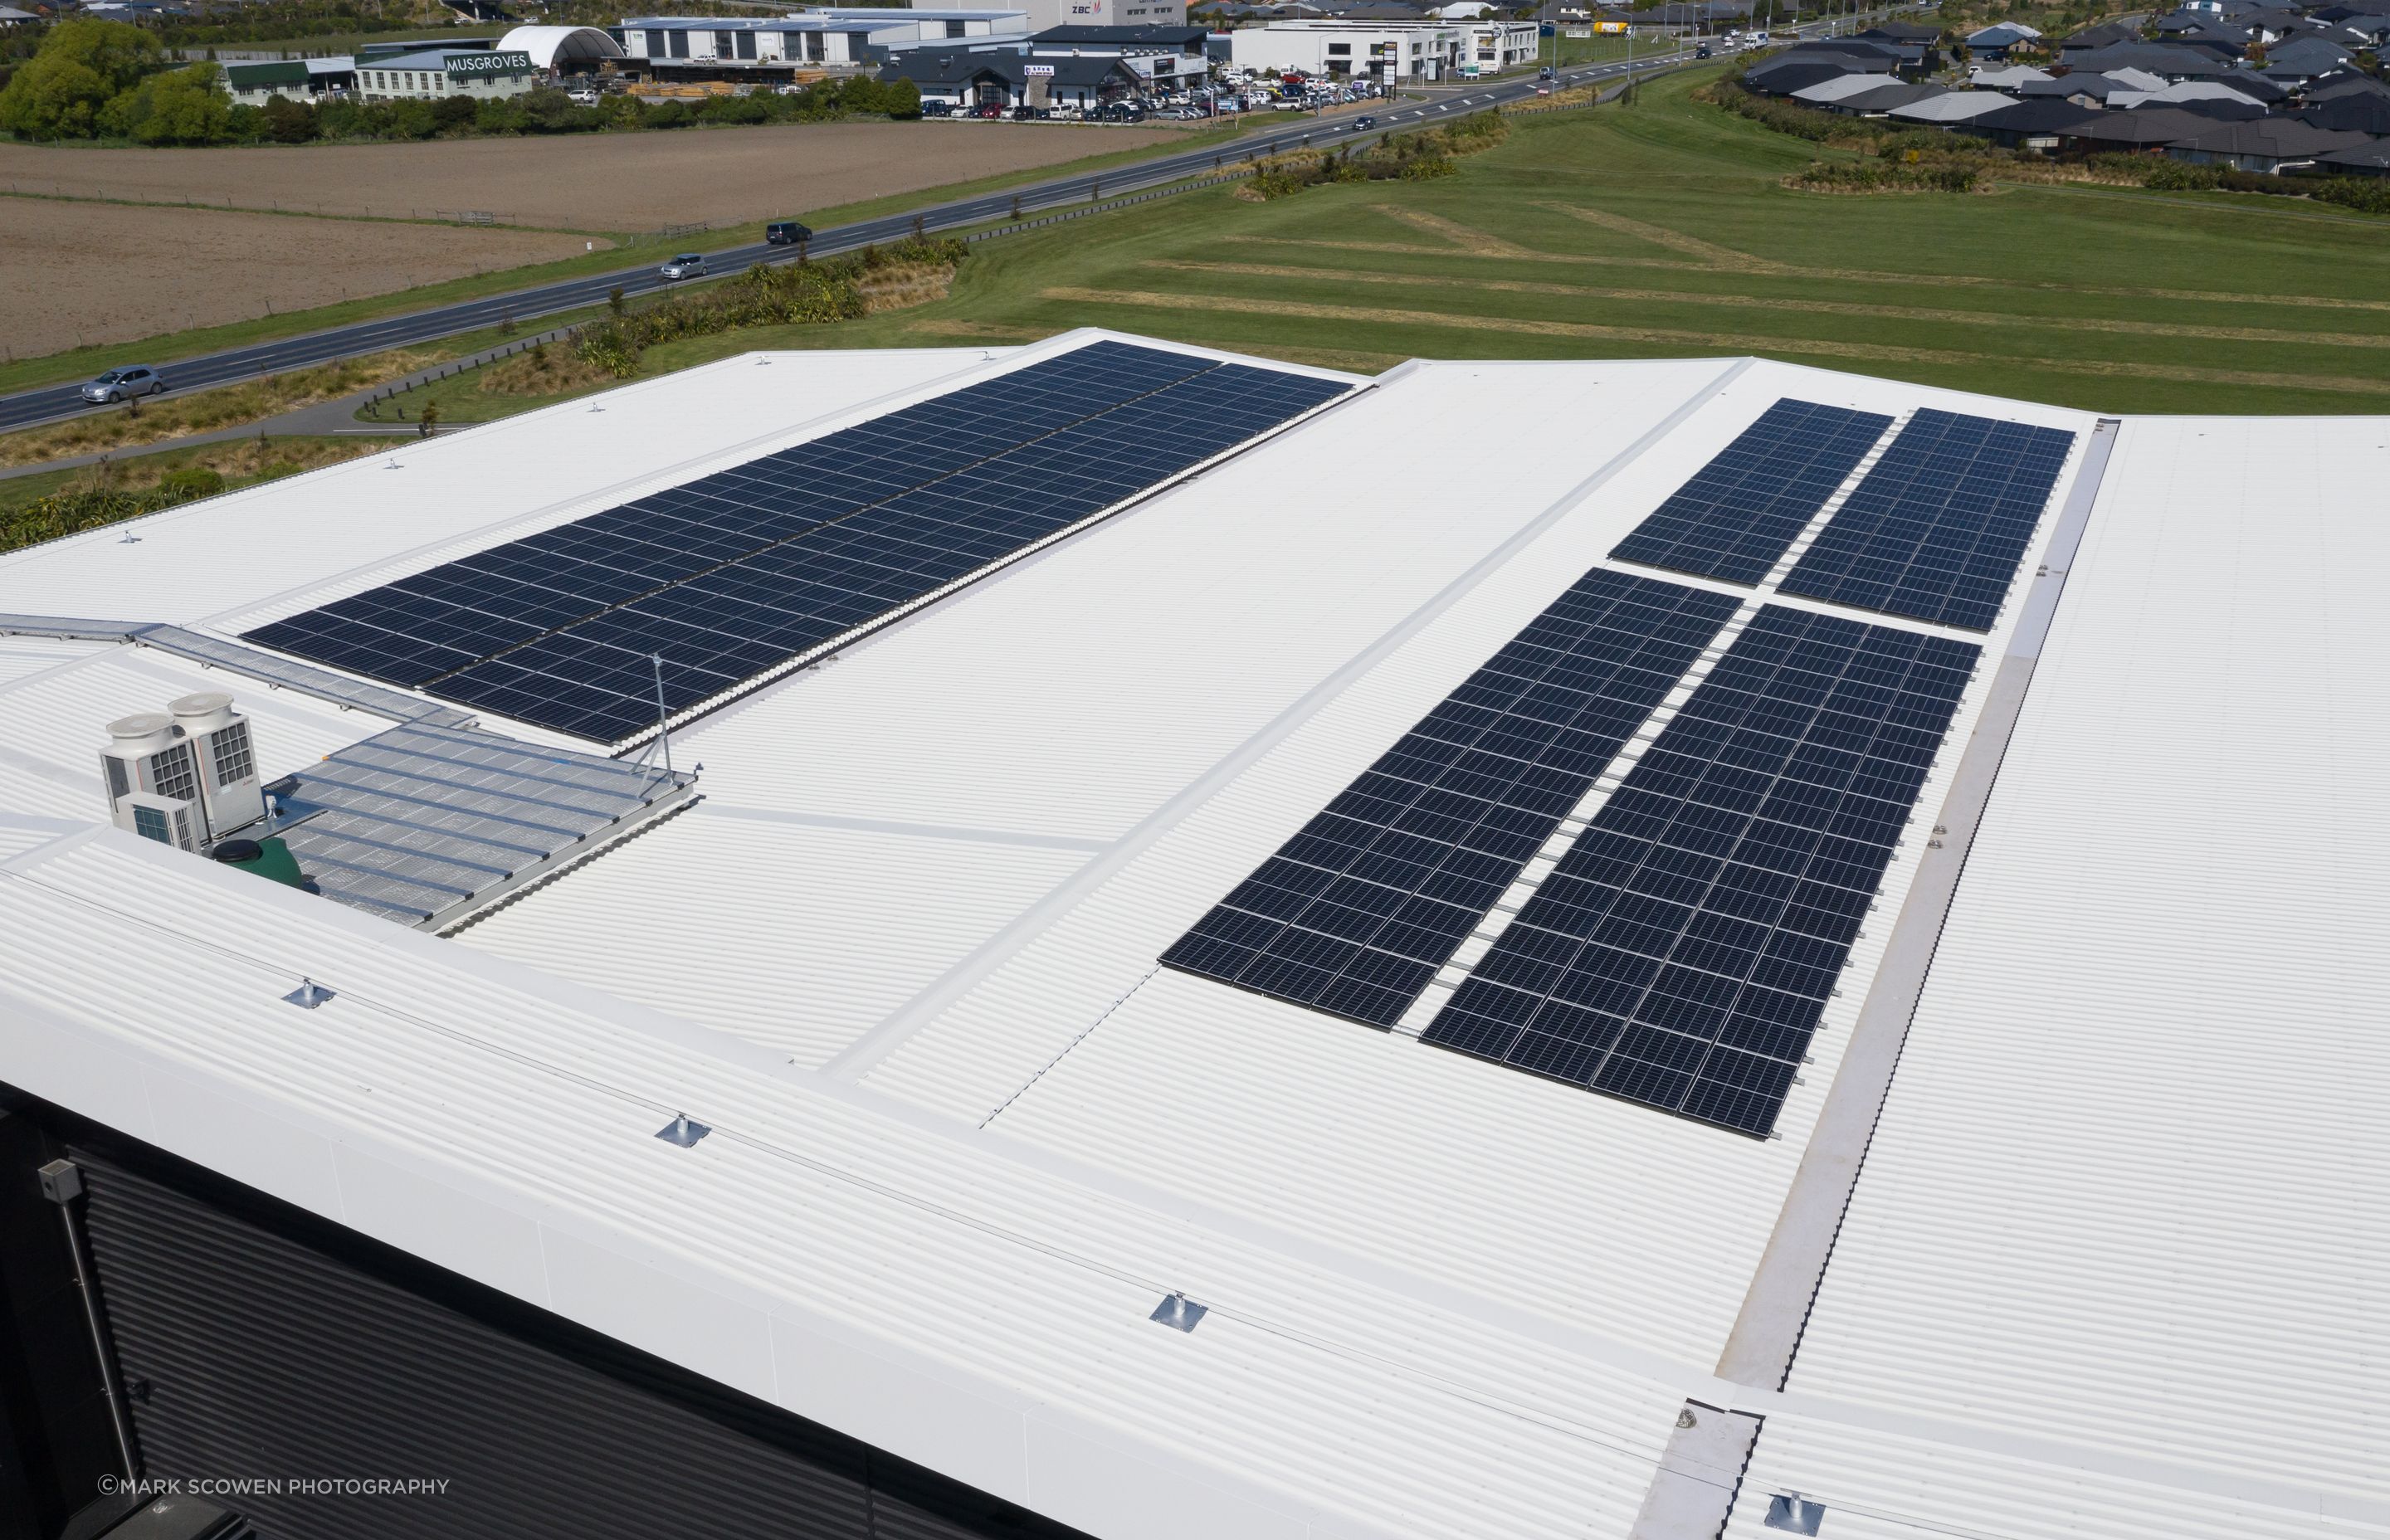 A photovoltaic array has been installed on the roof to offset the building’s energy consumption and to power the EV chargers that have been installed in the car park.